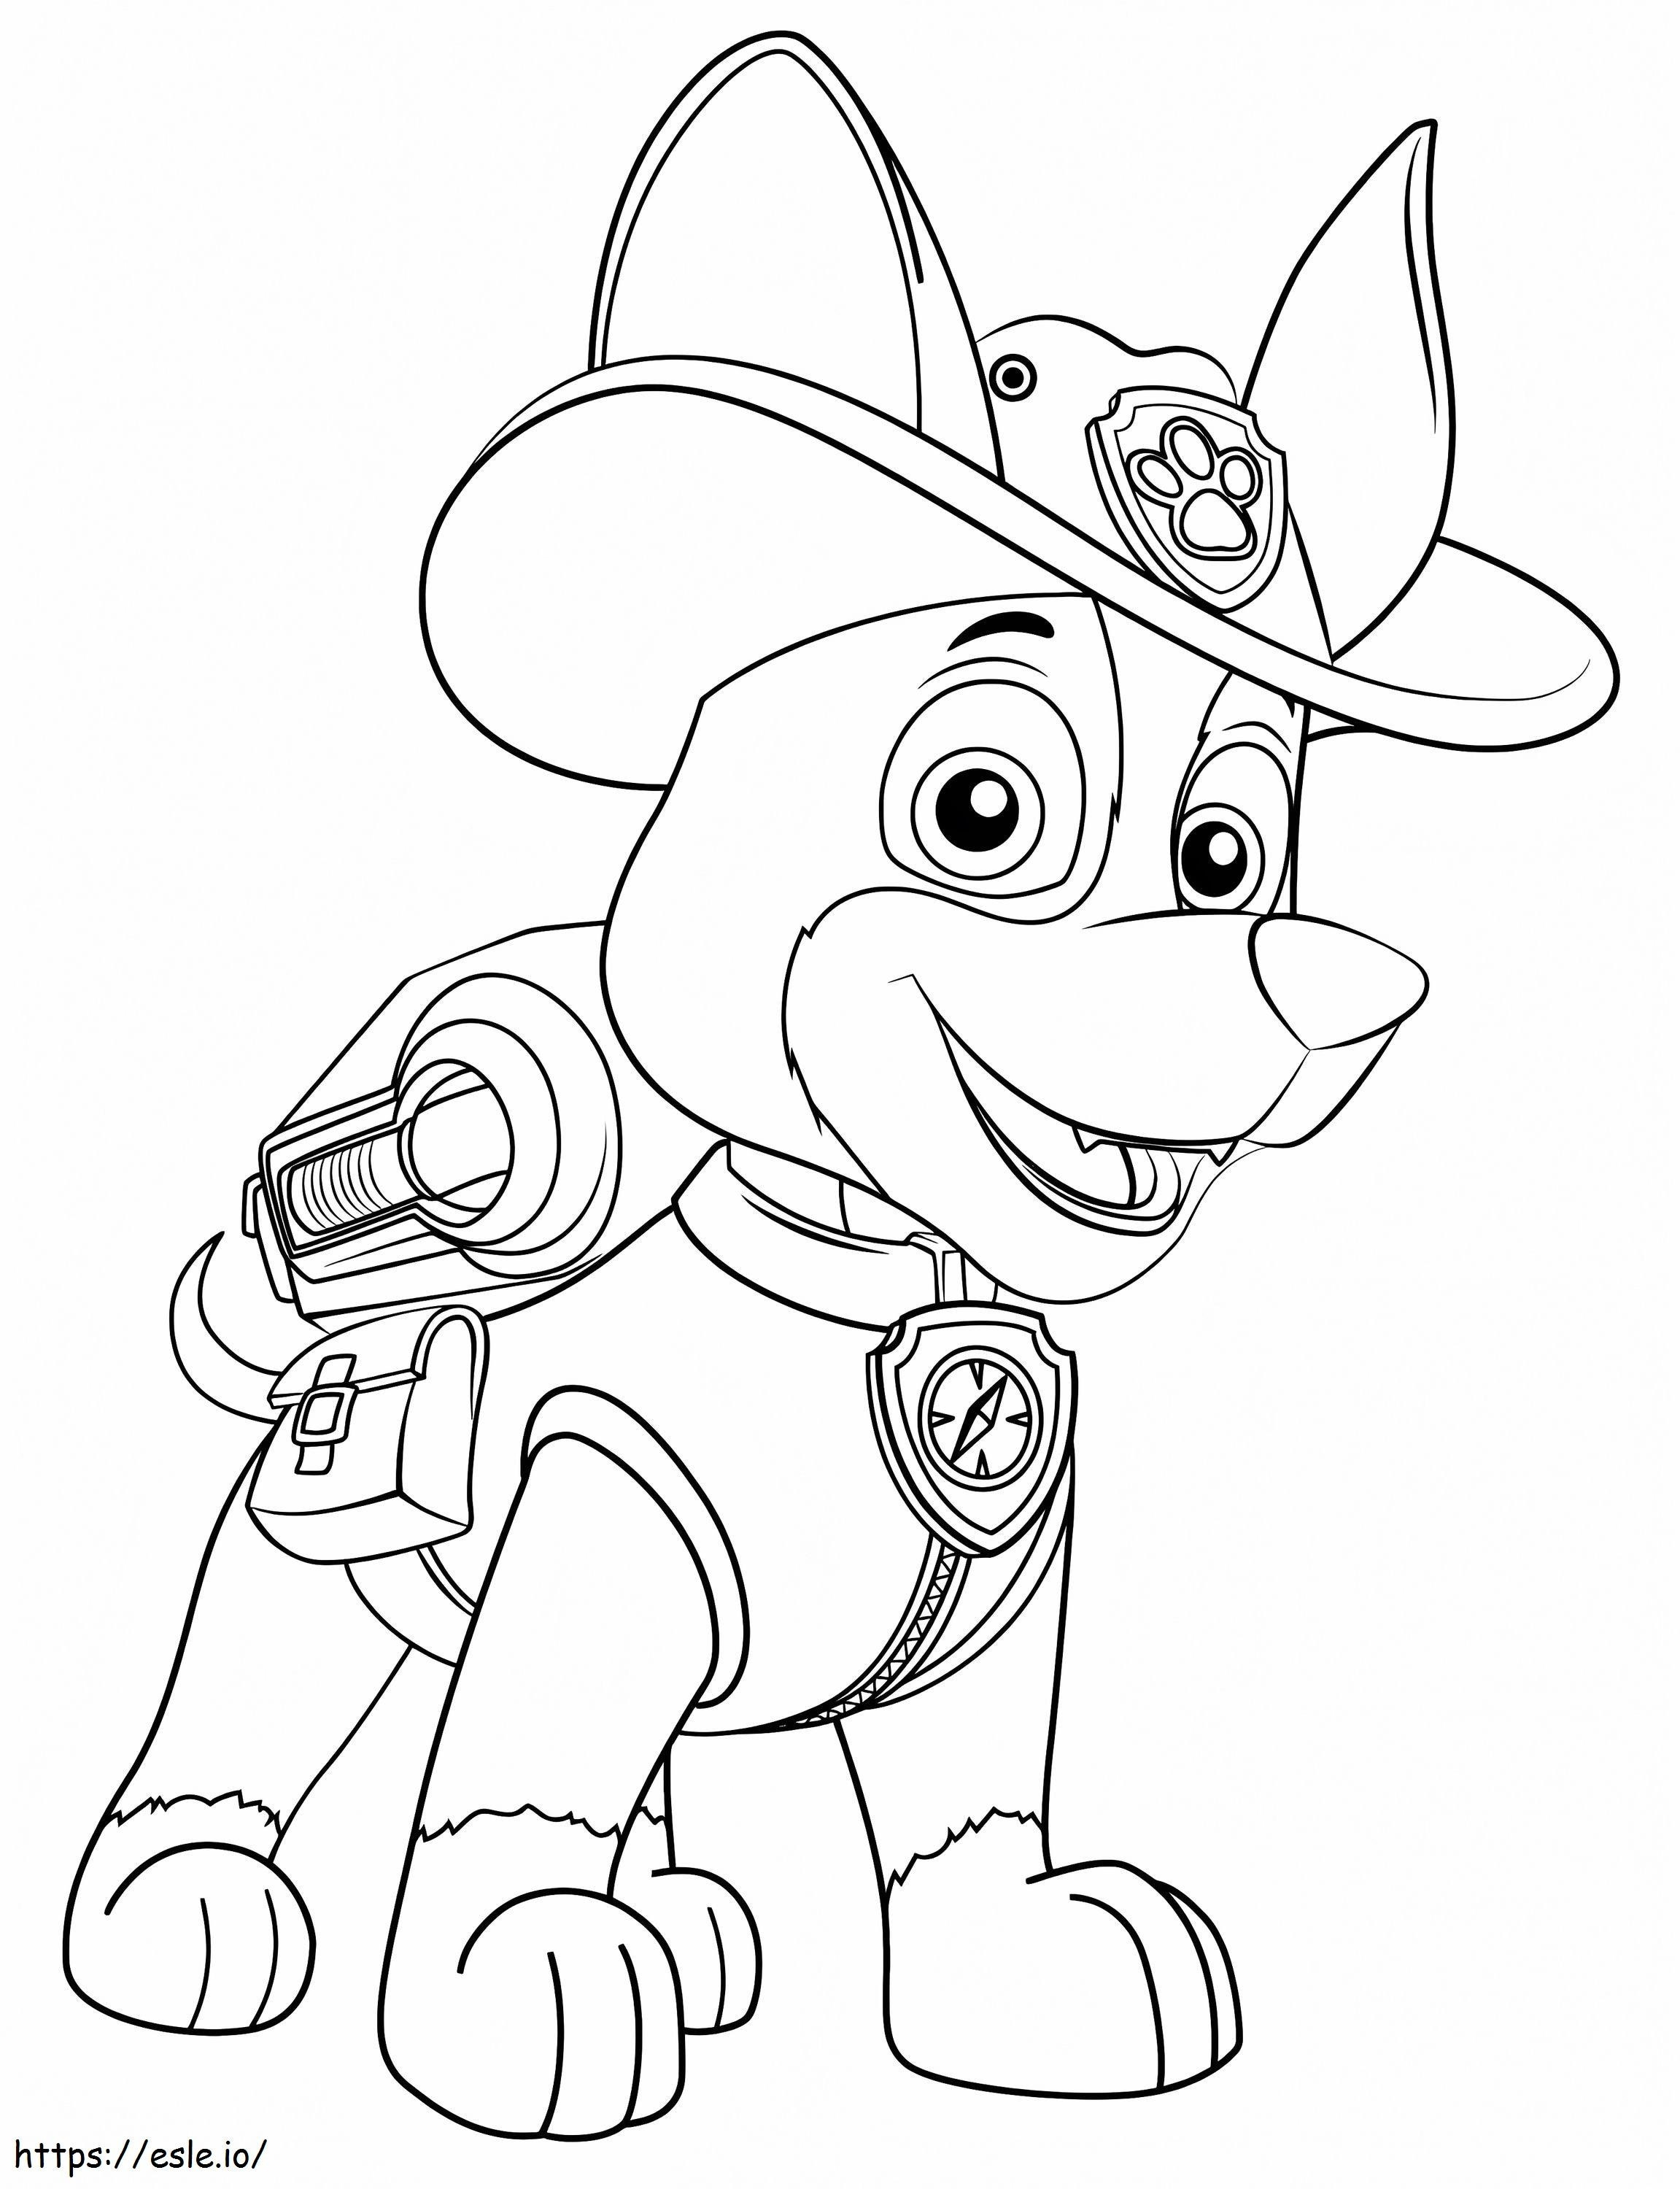 Tracker Is Smiling coloring page